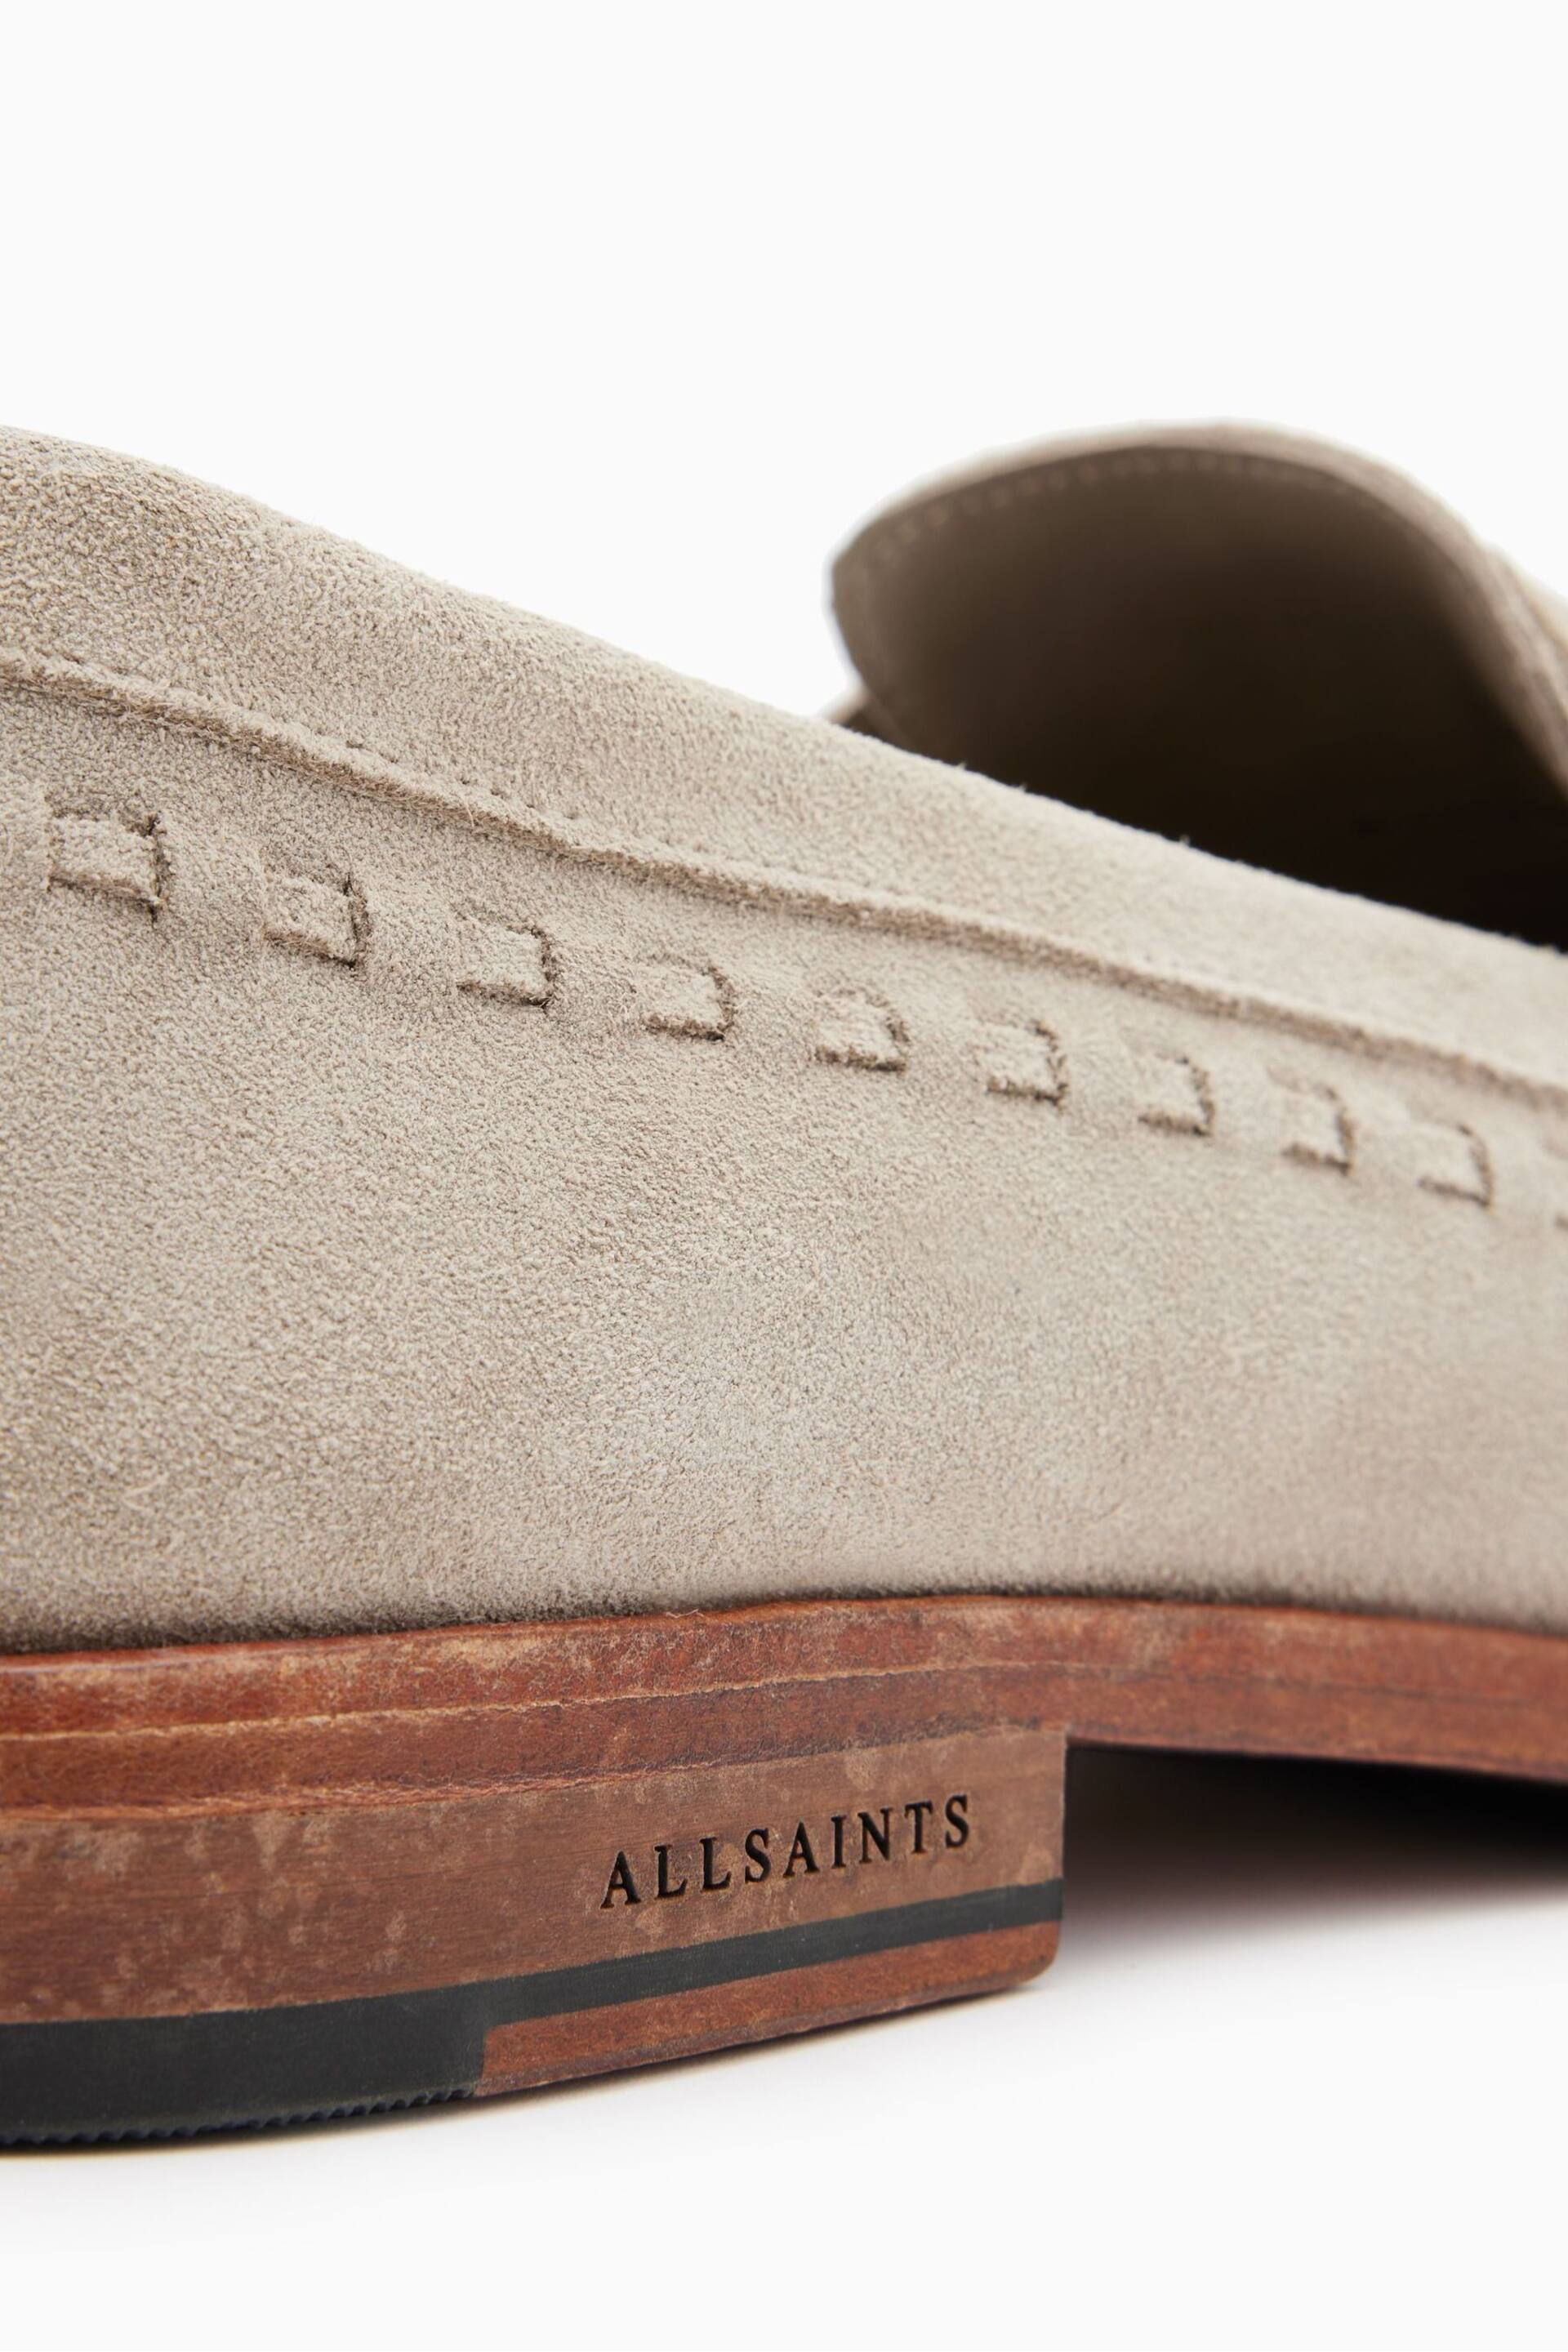 AllSaints Cream Sammy Loafers - Image 4 of 5